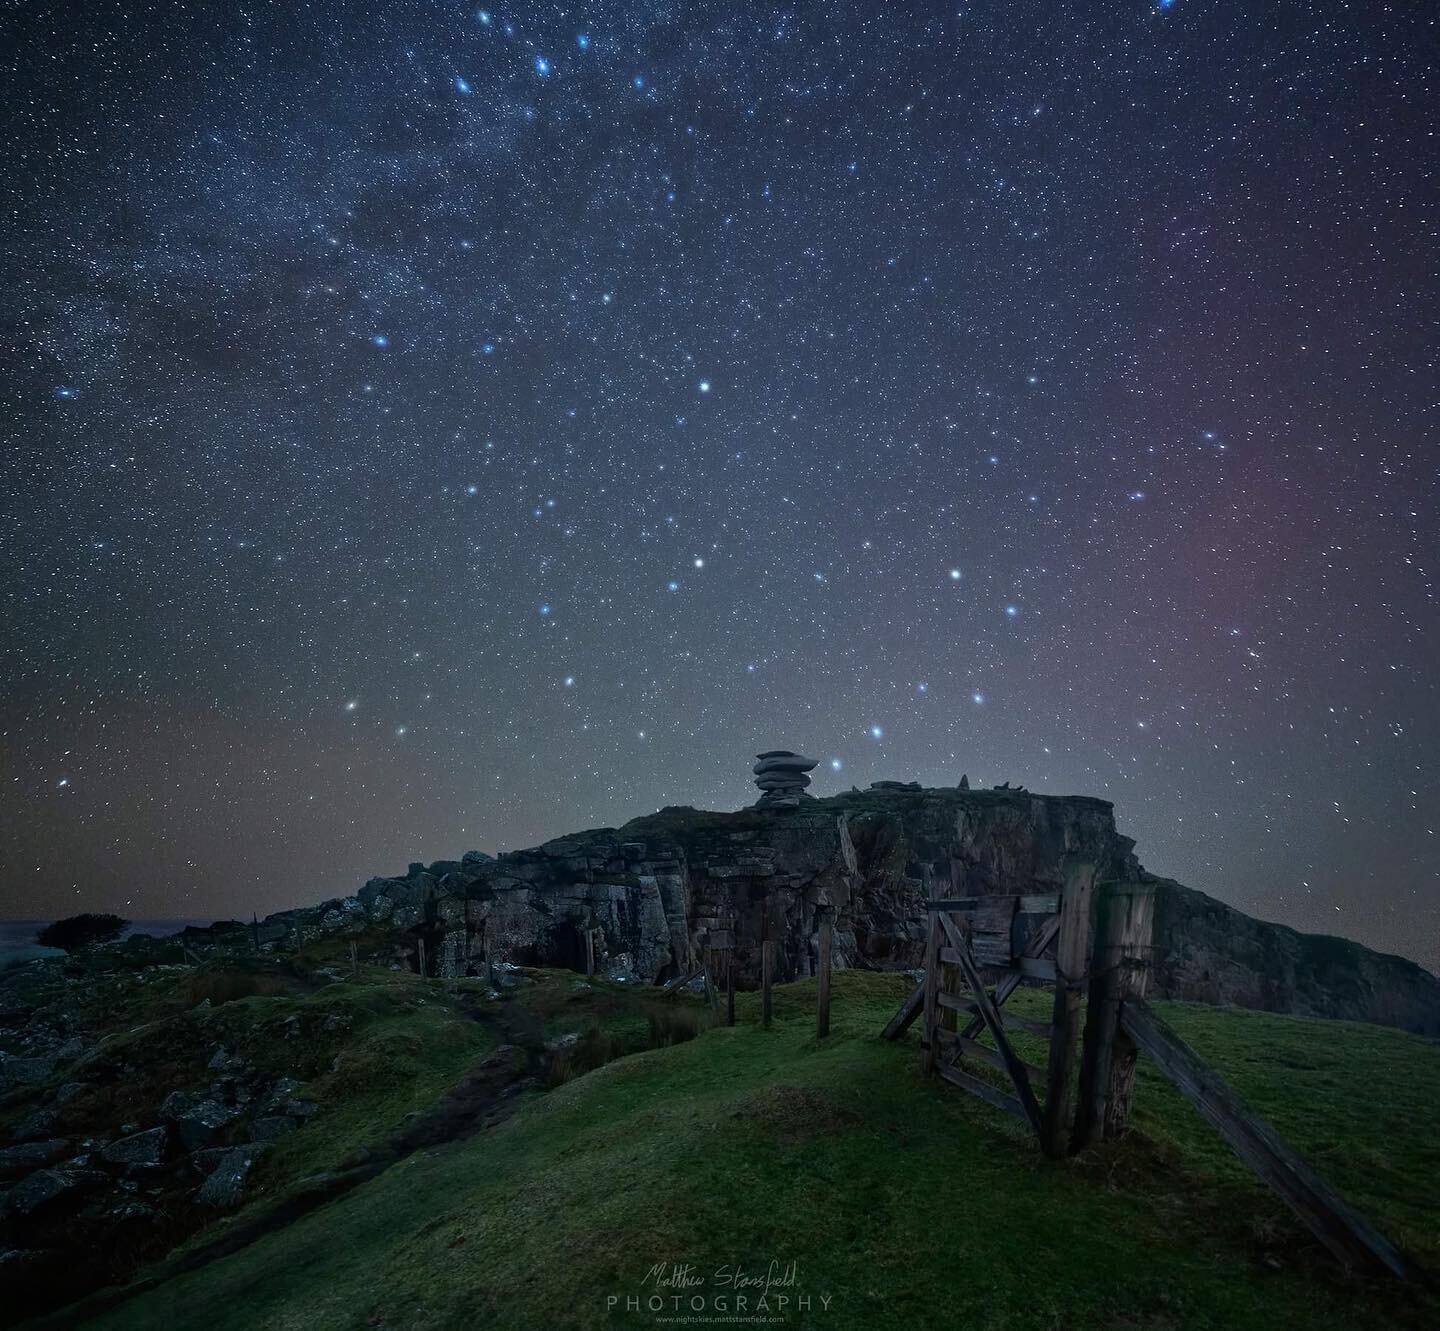 Cheesewring - Bodmin
Web: www.nightskies.mattstansfield.com

Although I did say that my last image from the Cheeswring would be my final image from last Sunday, I decided to edit this final composition from the evening. Going to miss nights like this